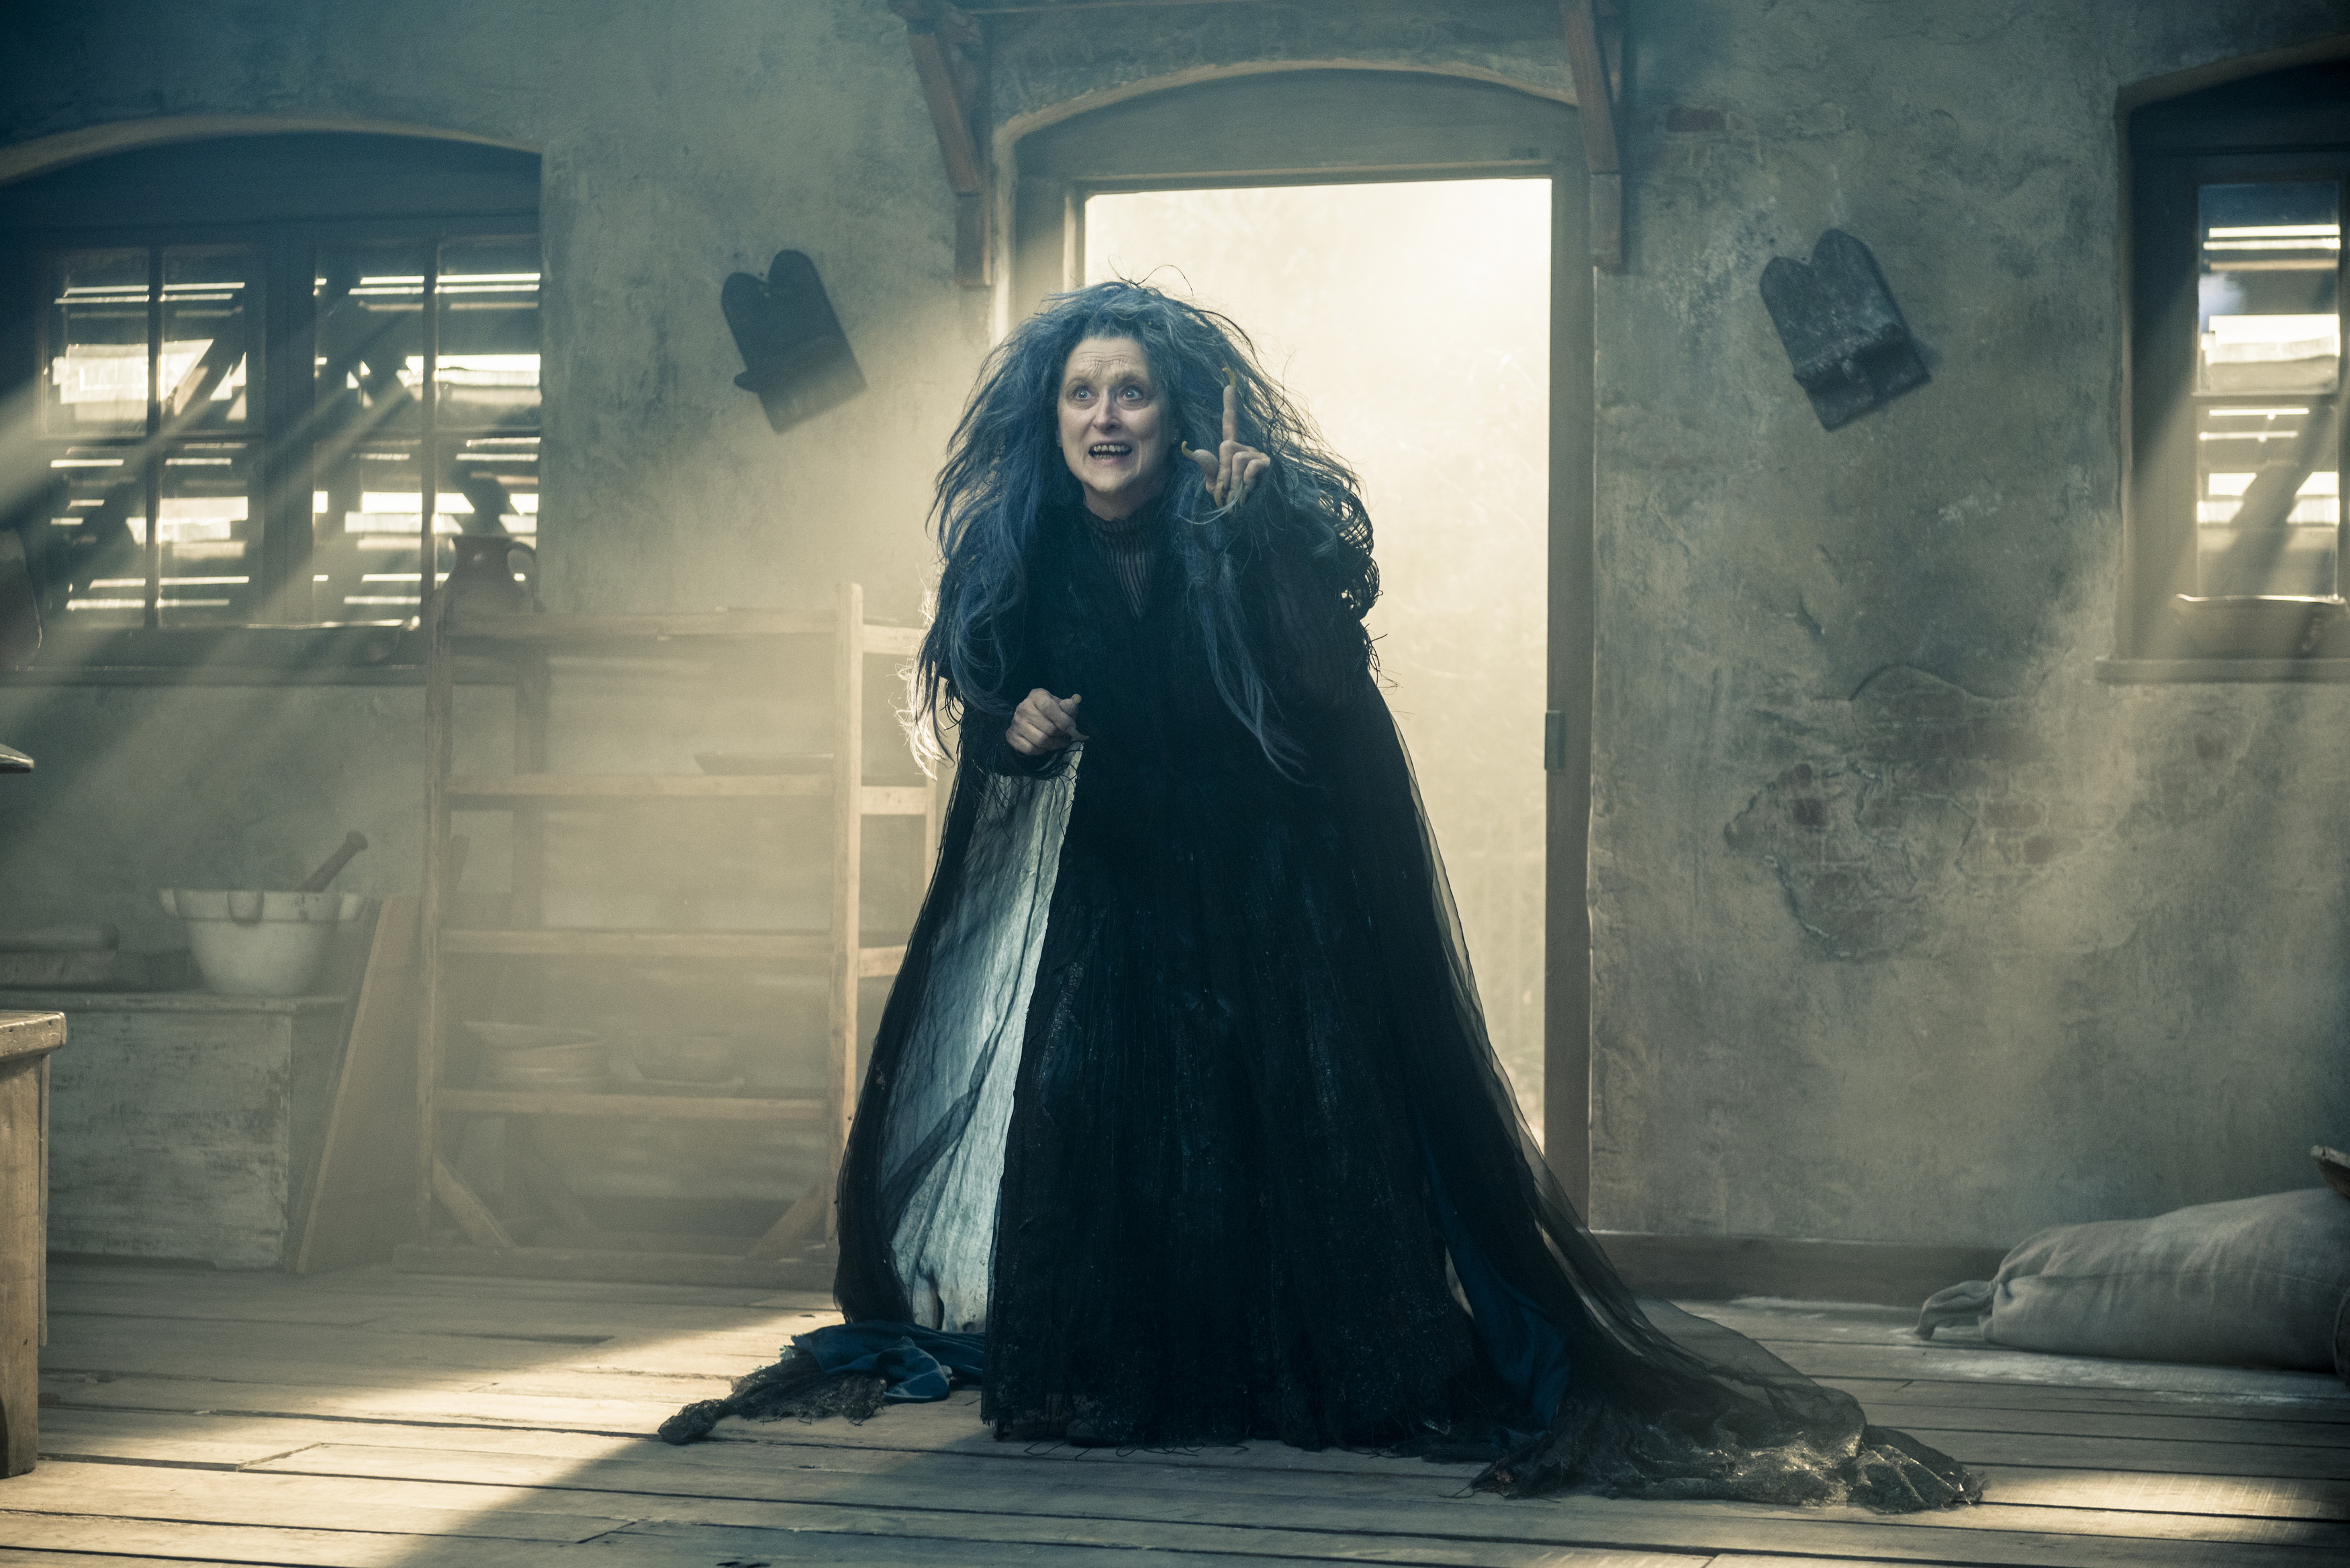 New Into the Woods Images Featuring Meryl Streep and Johnny Depp ...